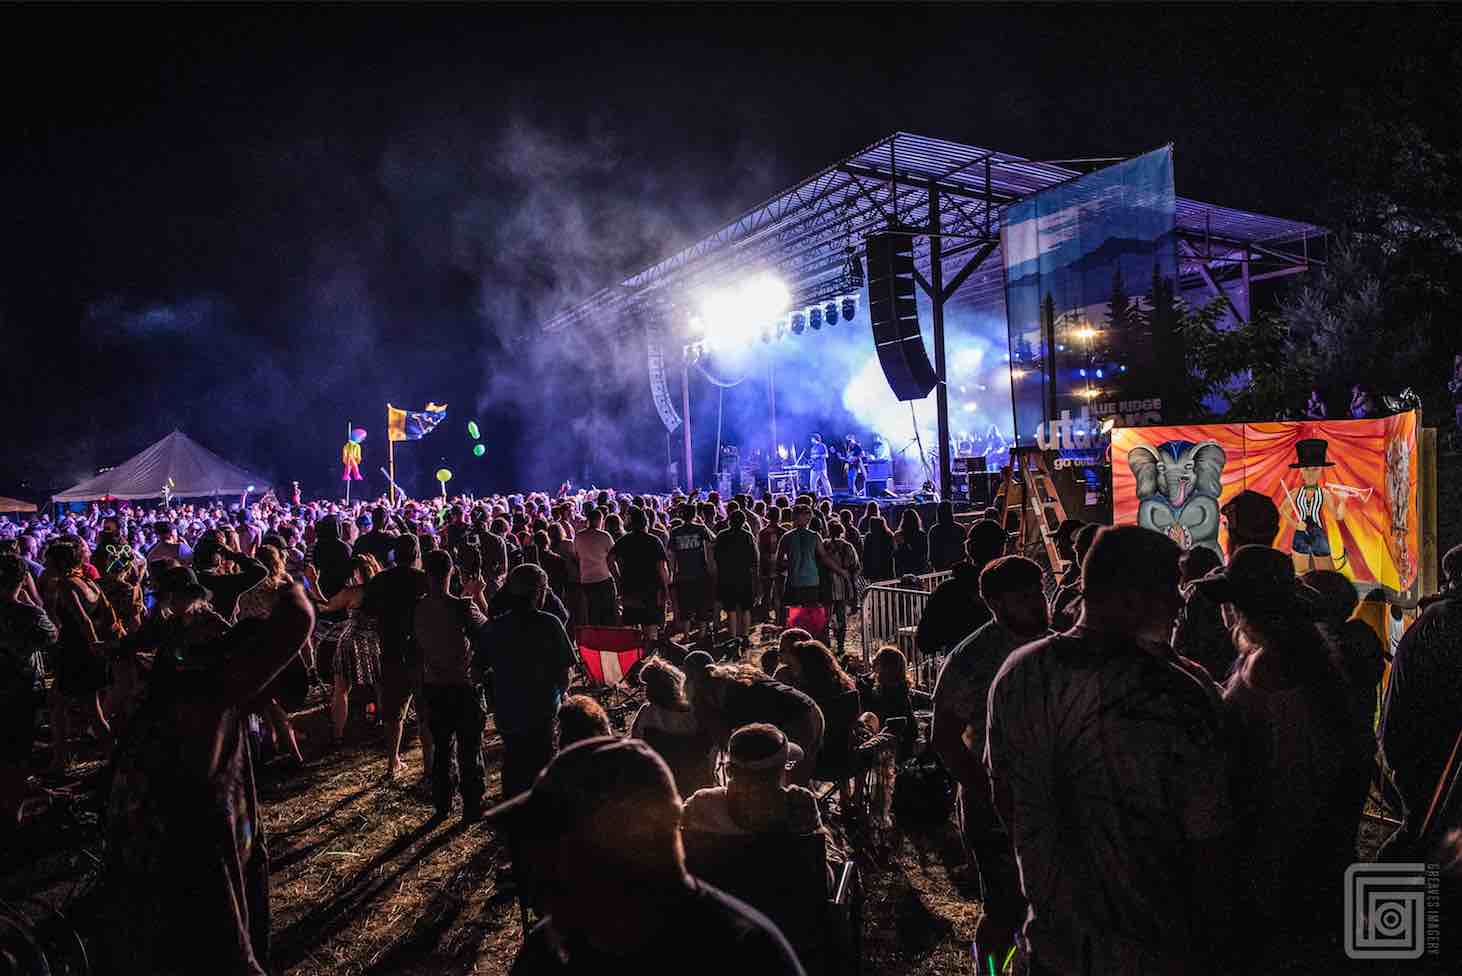 crowd in front of the stage at mountain music festival with artist mural